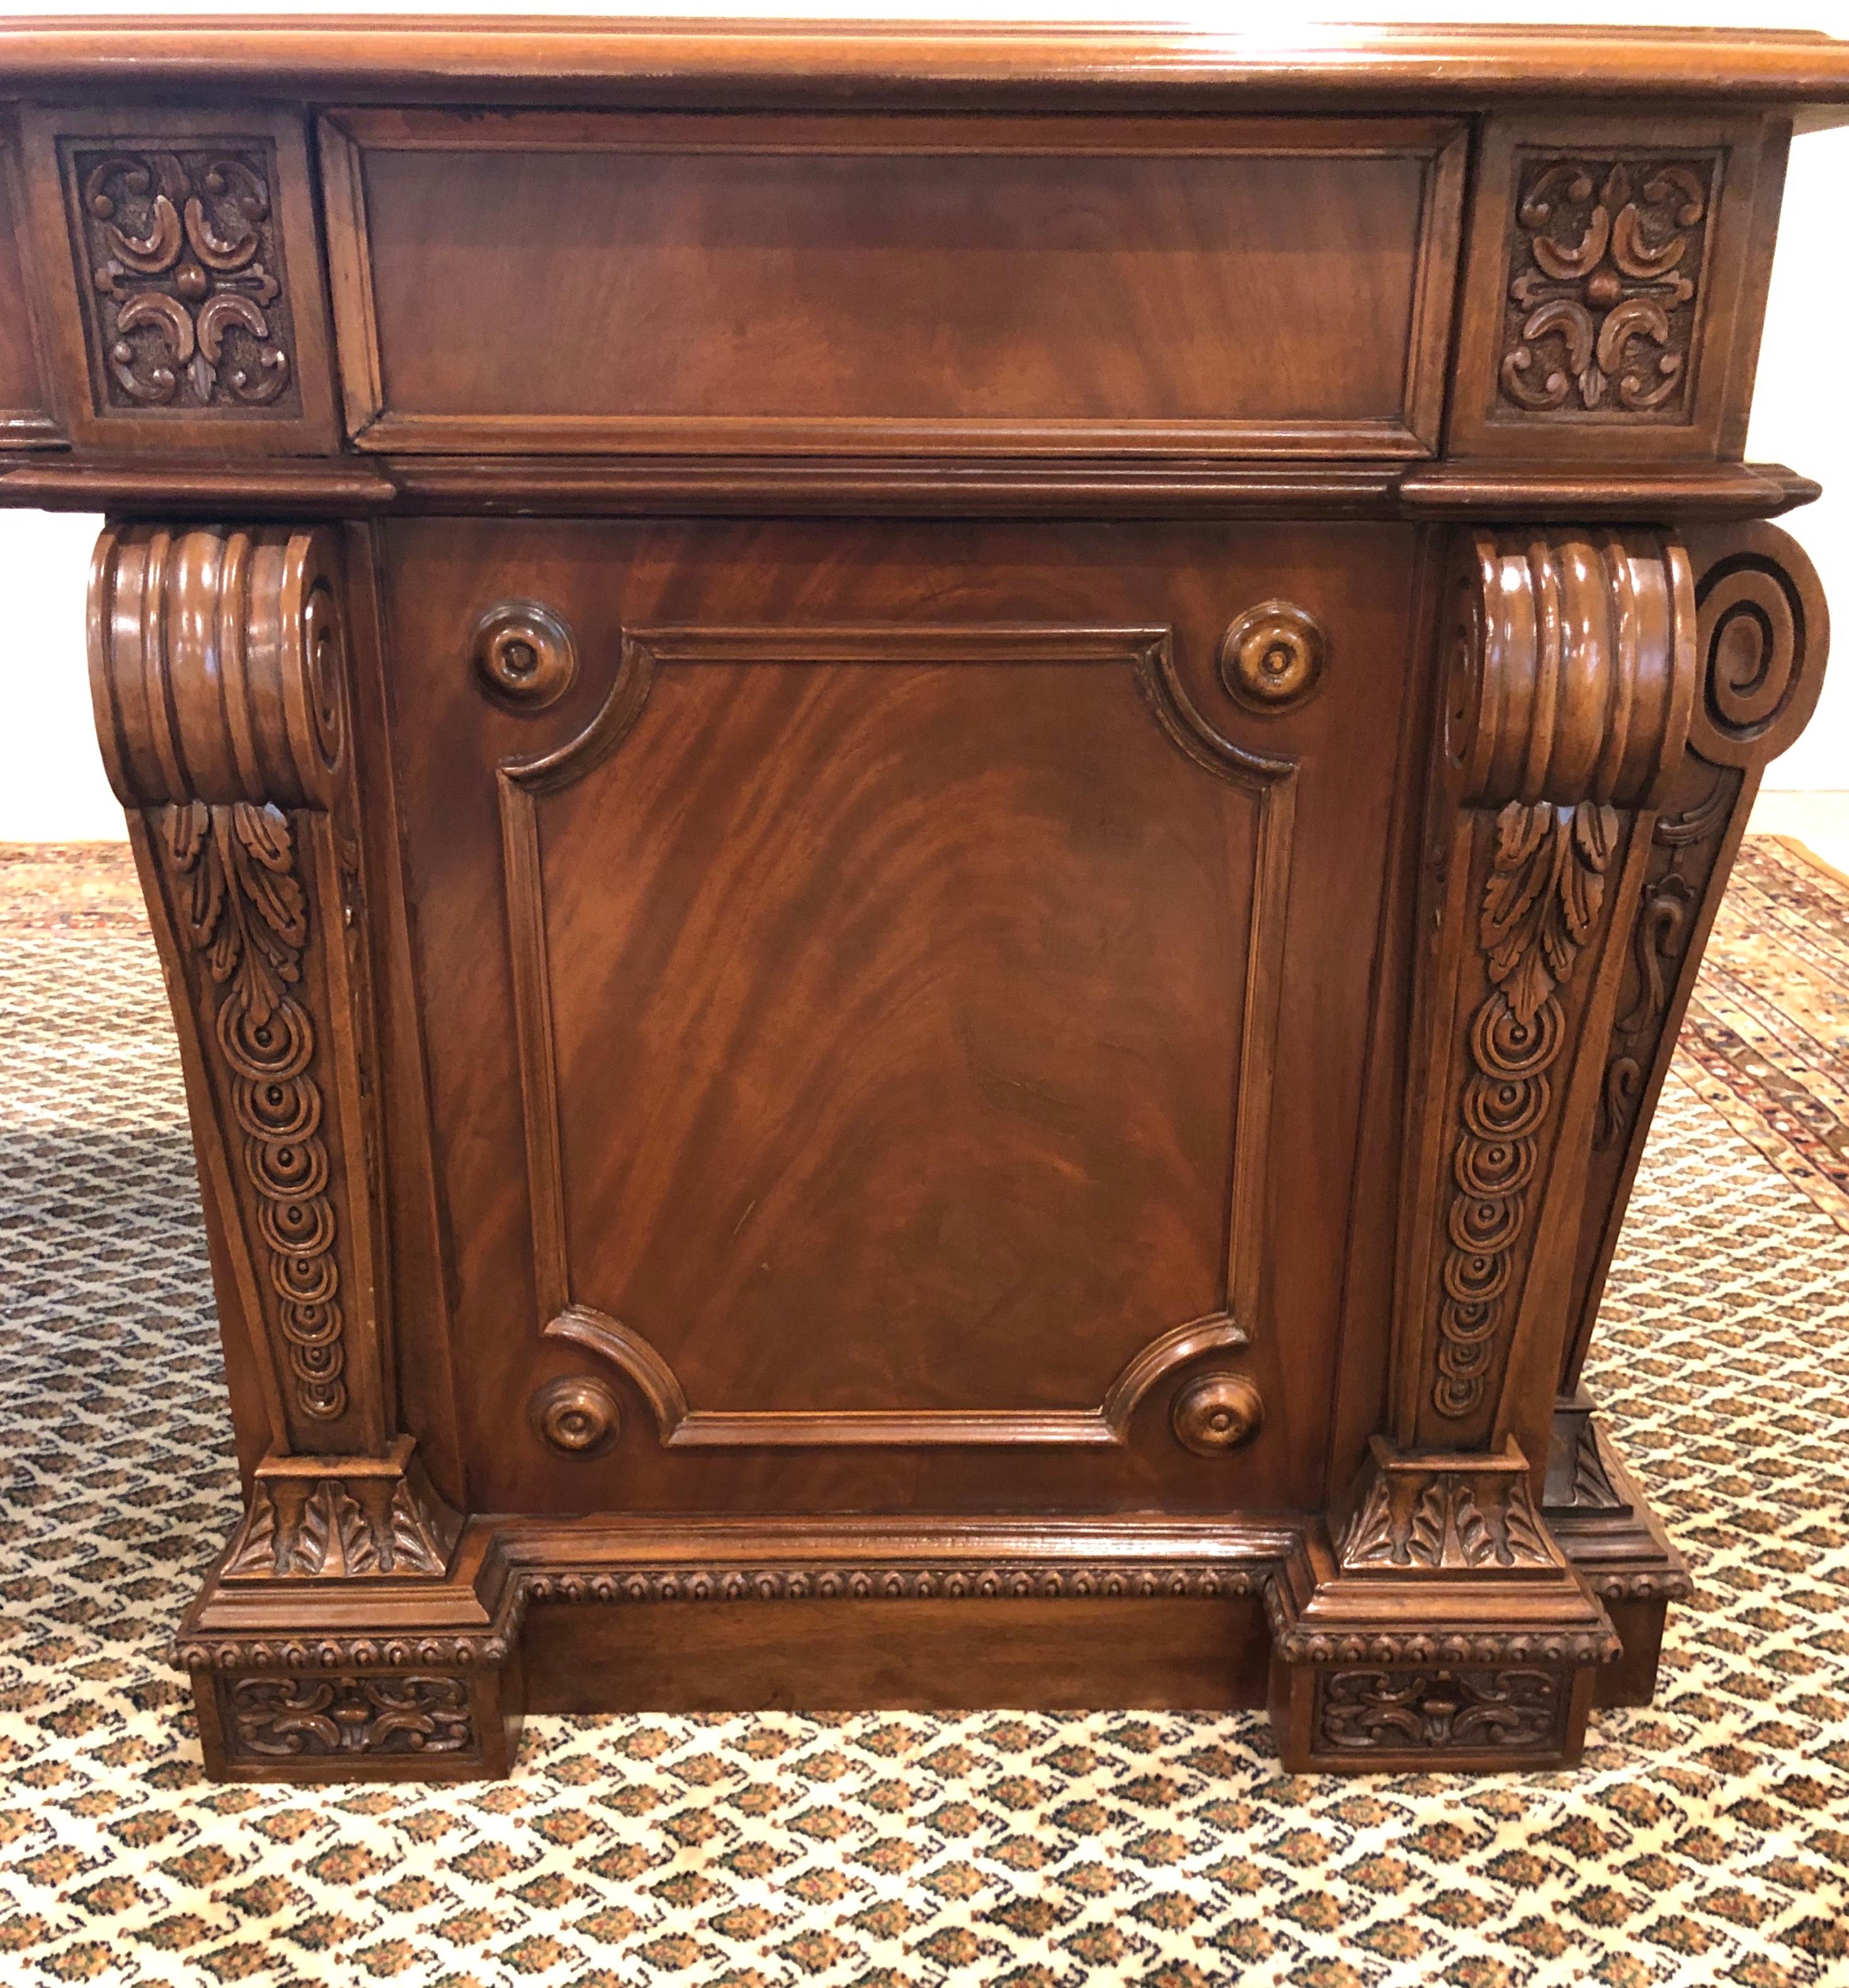 Hand-Carved Regency Mahogany Twin Pedestal Desk with Gold Tooled Leather Top